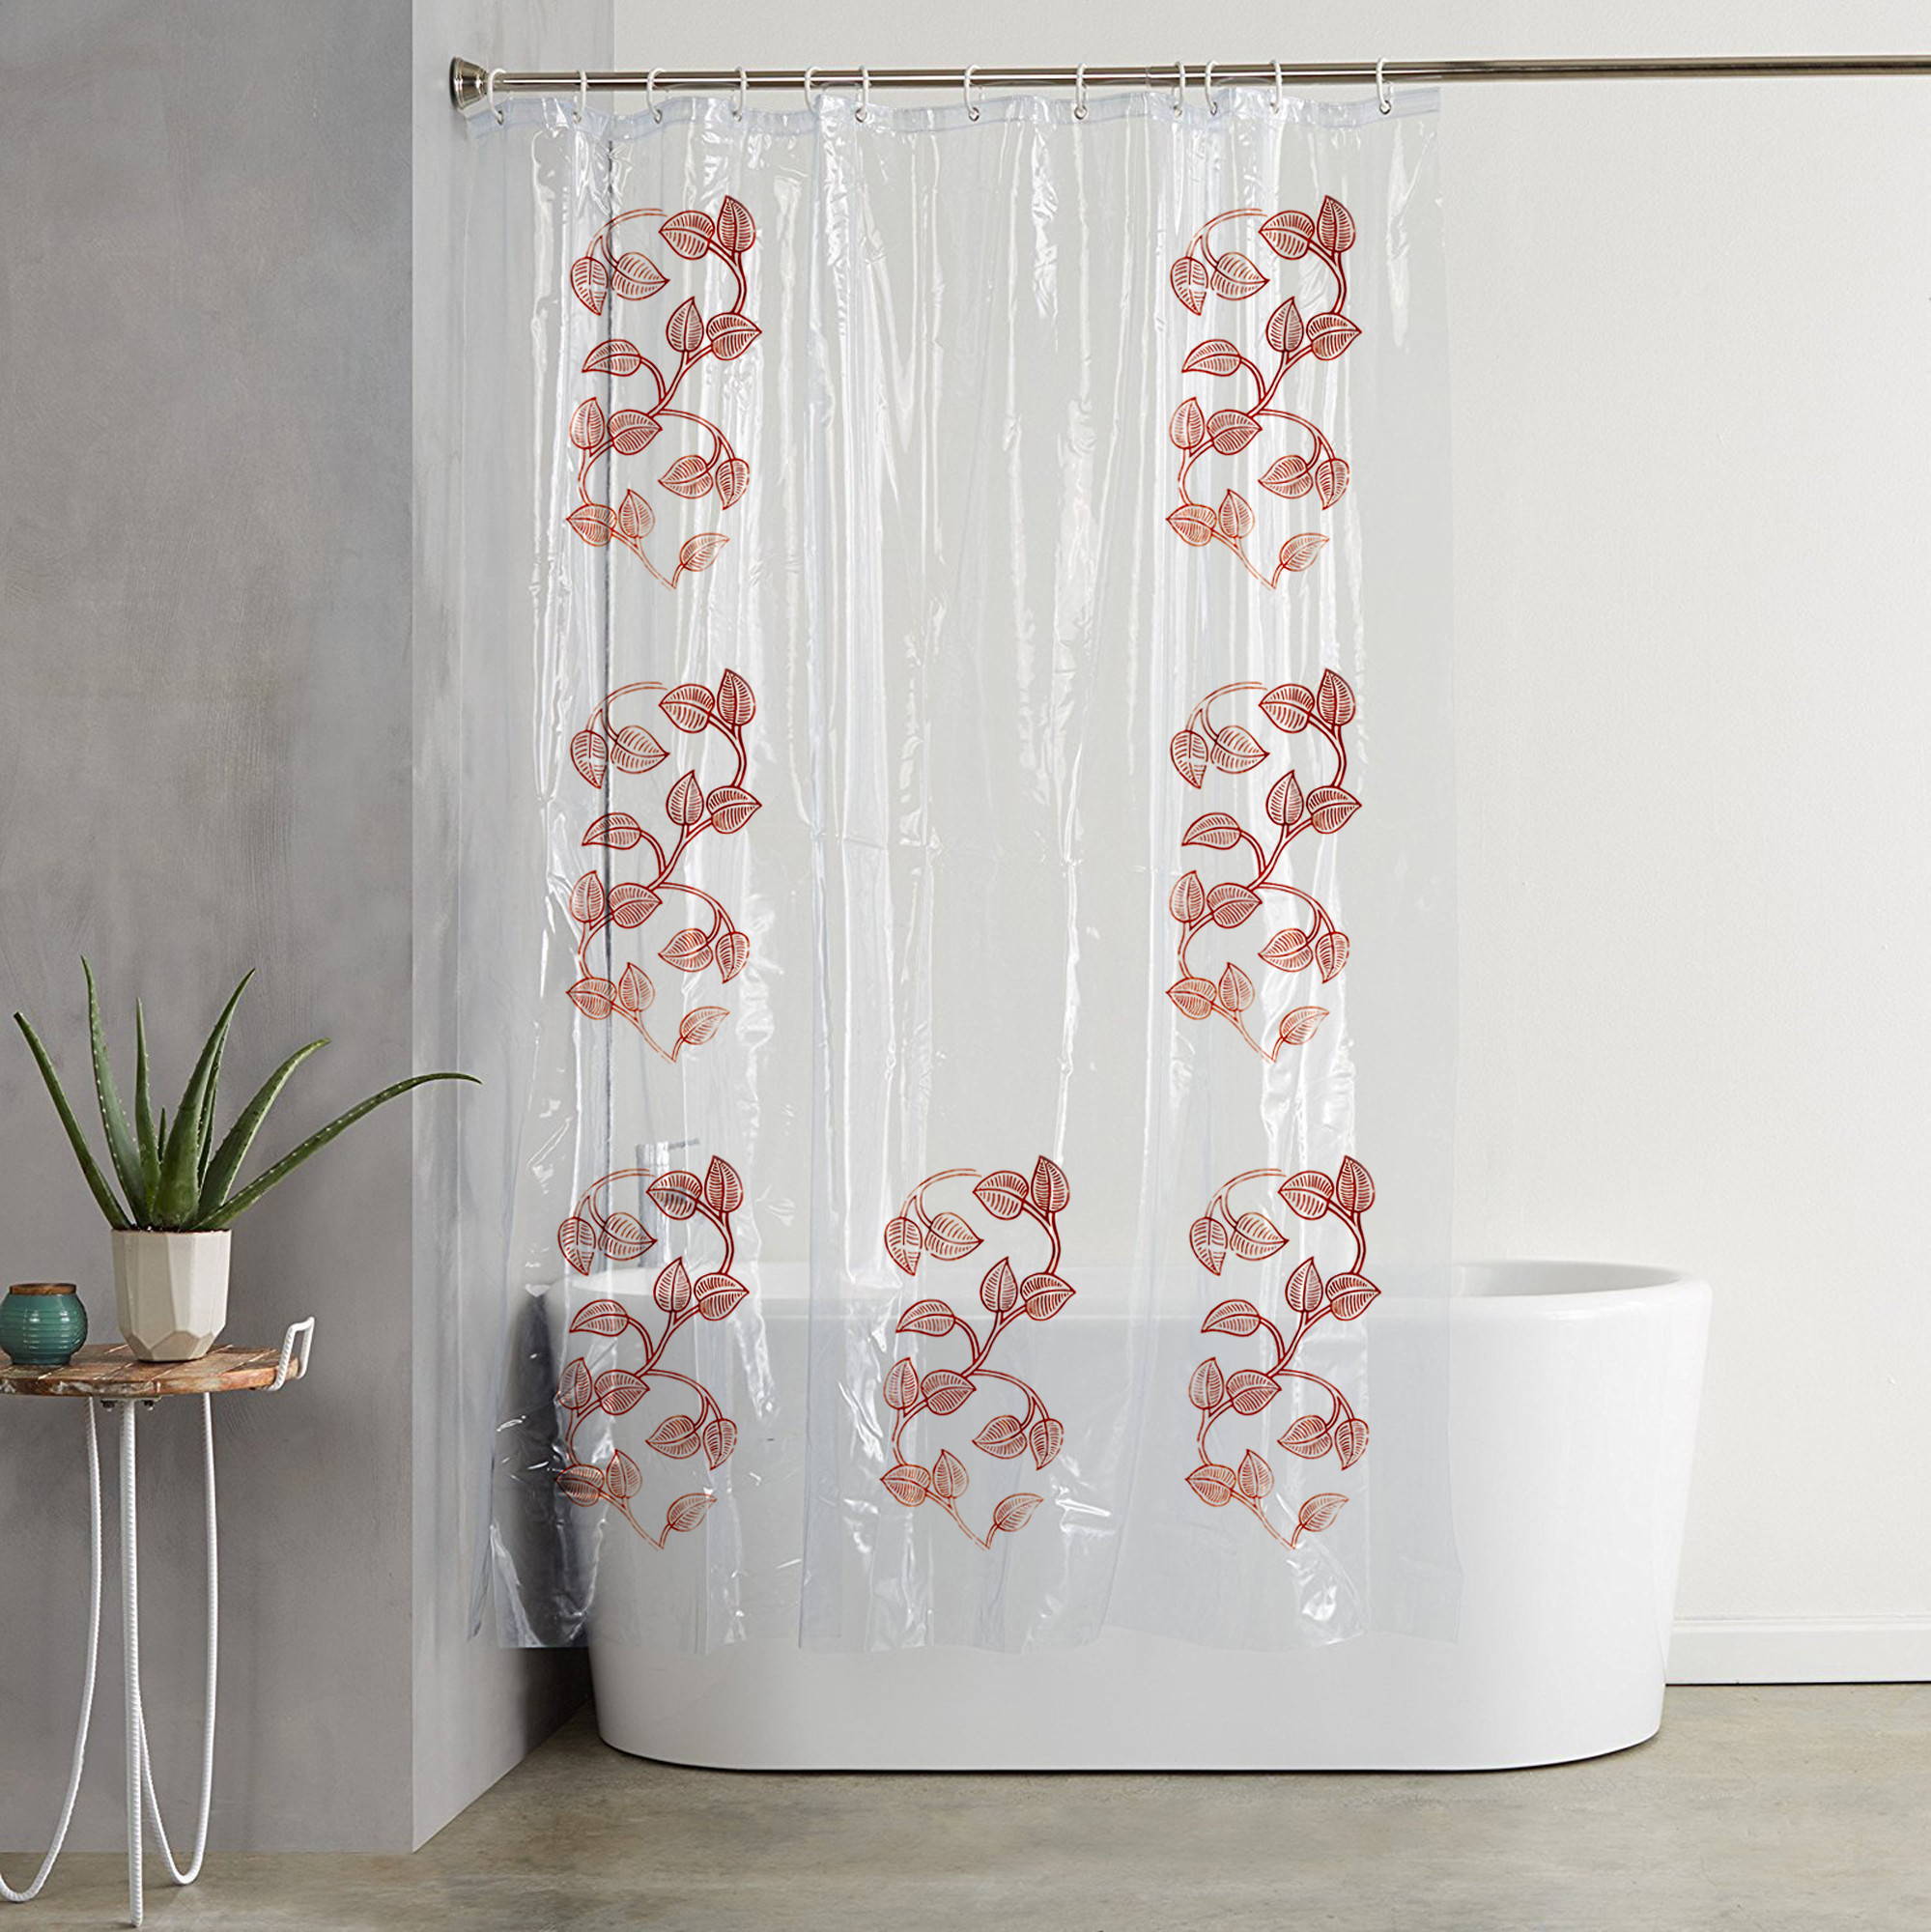 Kuber Industries 0.30mm Leaf Printed Stain Resistant, No Odor, Waterproof PVC AC/Shower Curtain With Hooks,7 Feet (Transparent)